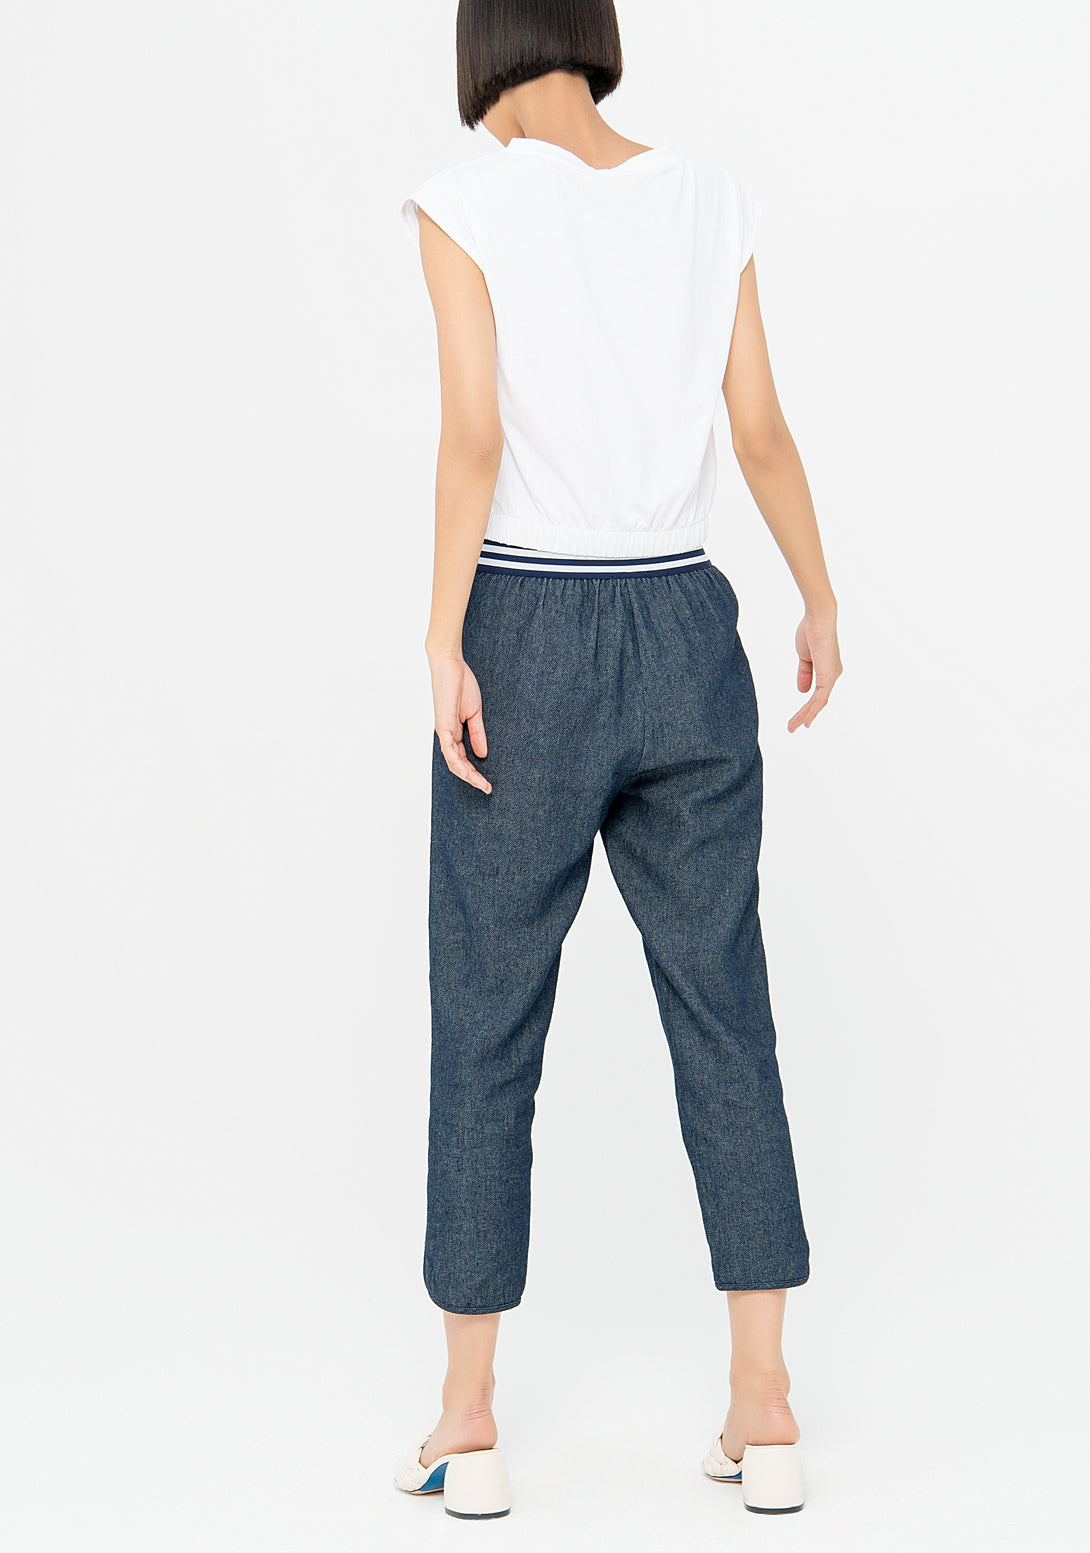 Pant loose fit made in cotton and linen